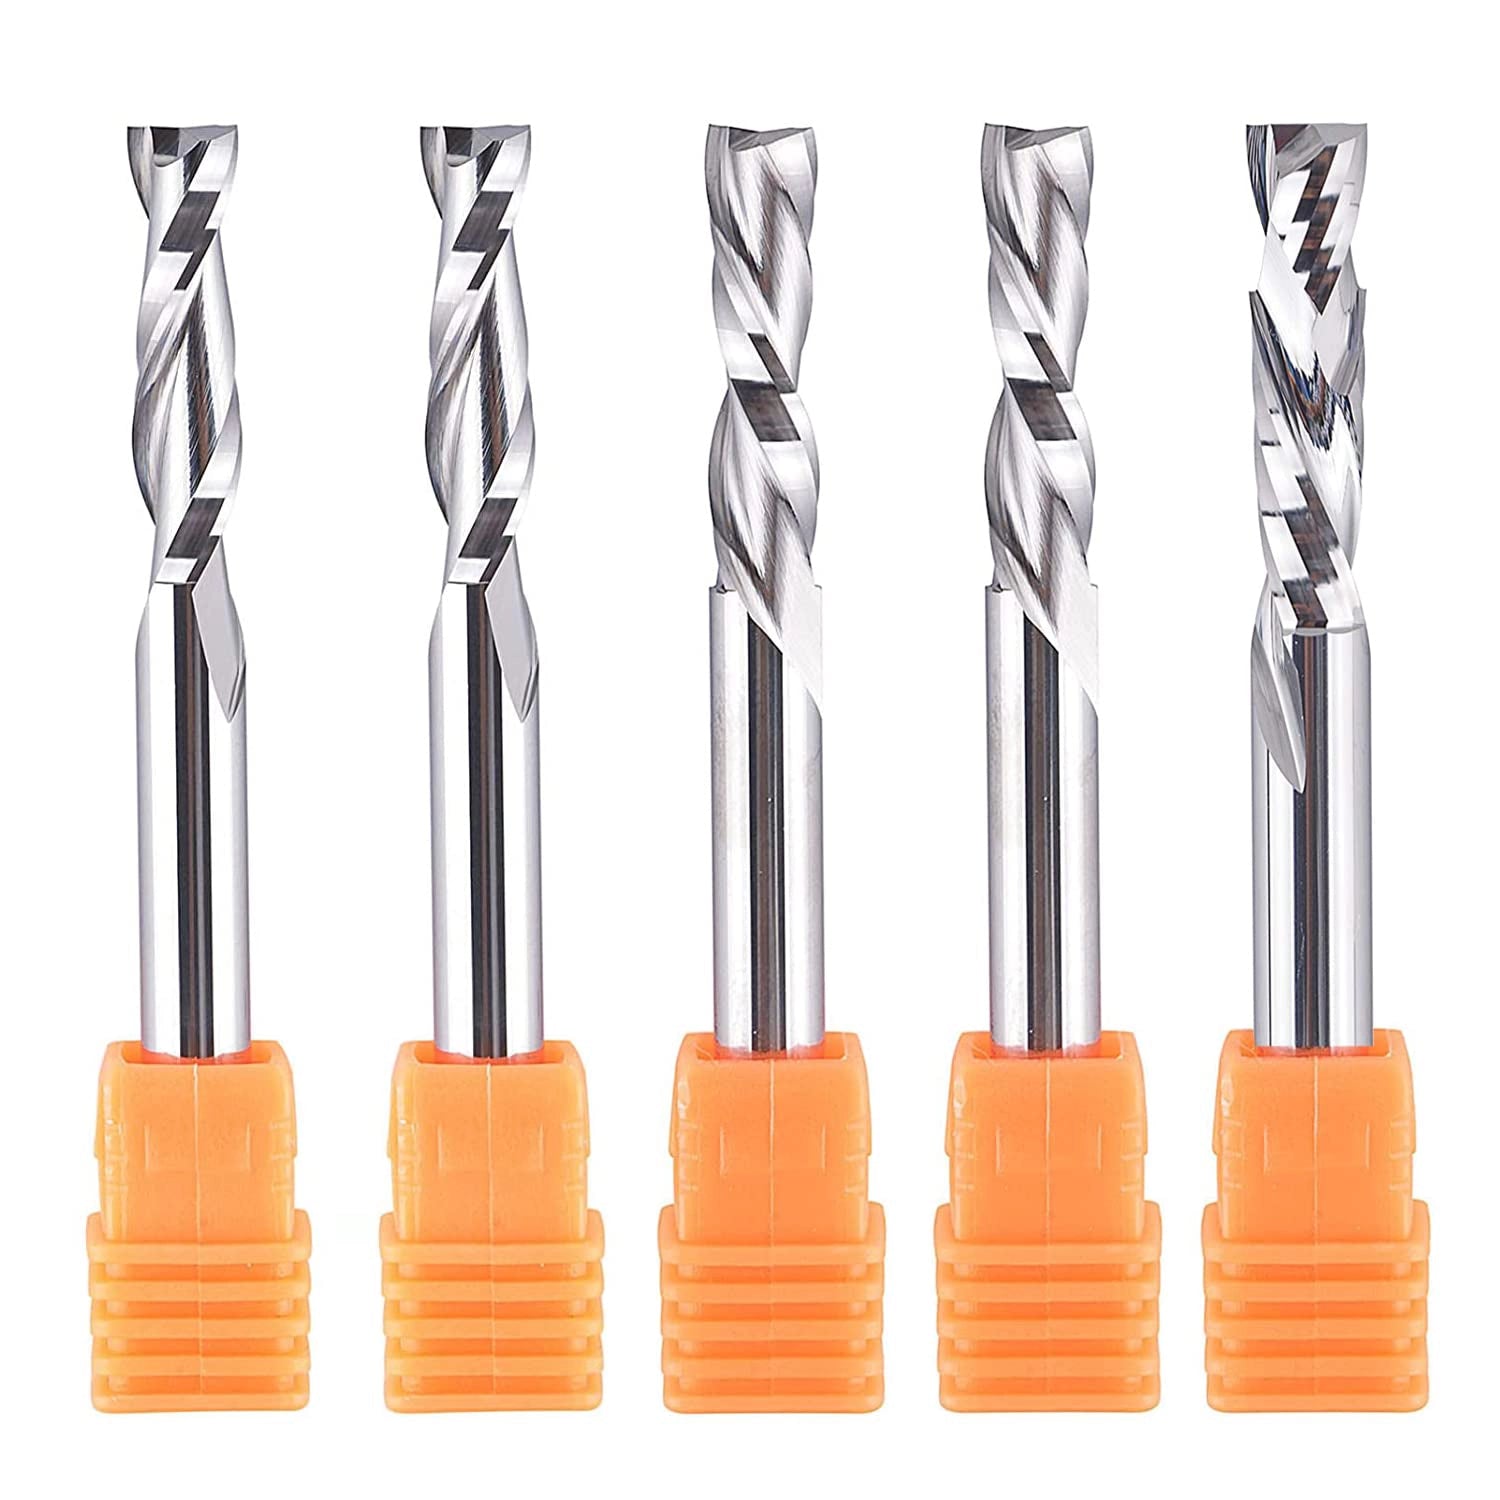 Eujgoov Spiral End Mill 2-Flute CNC Router Bits High Speed Steel